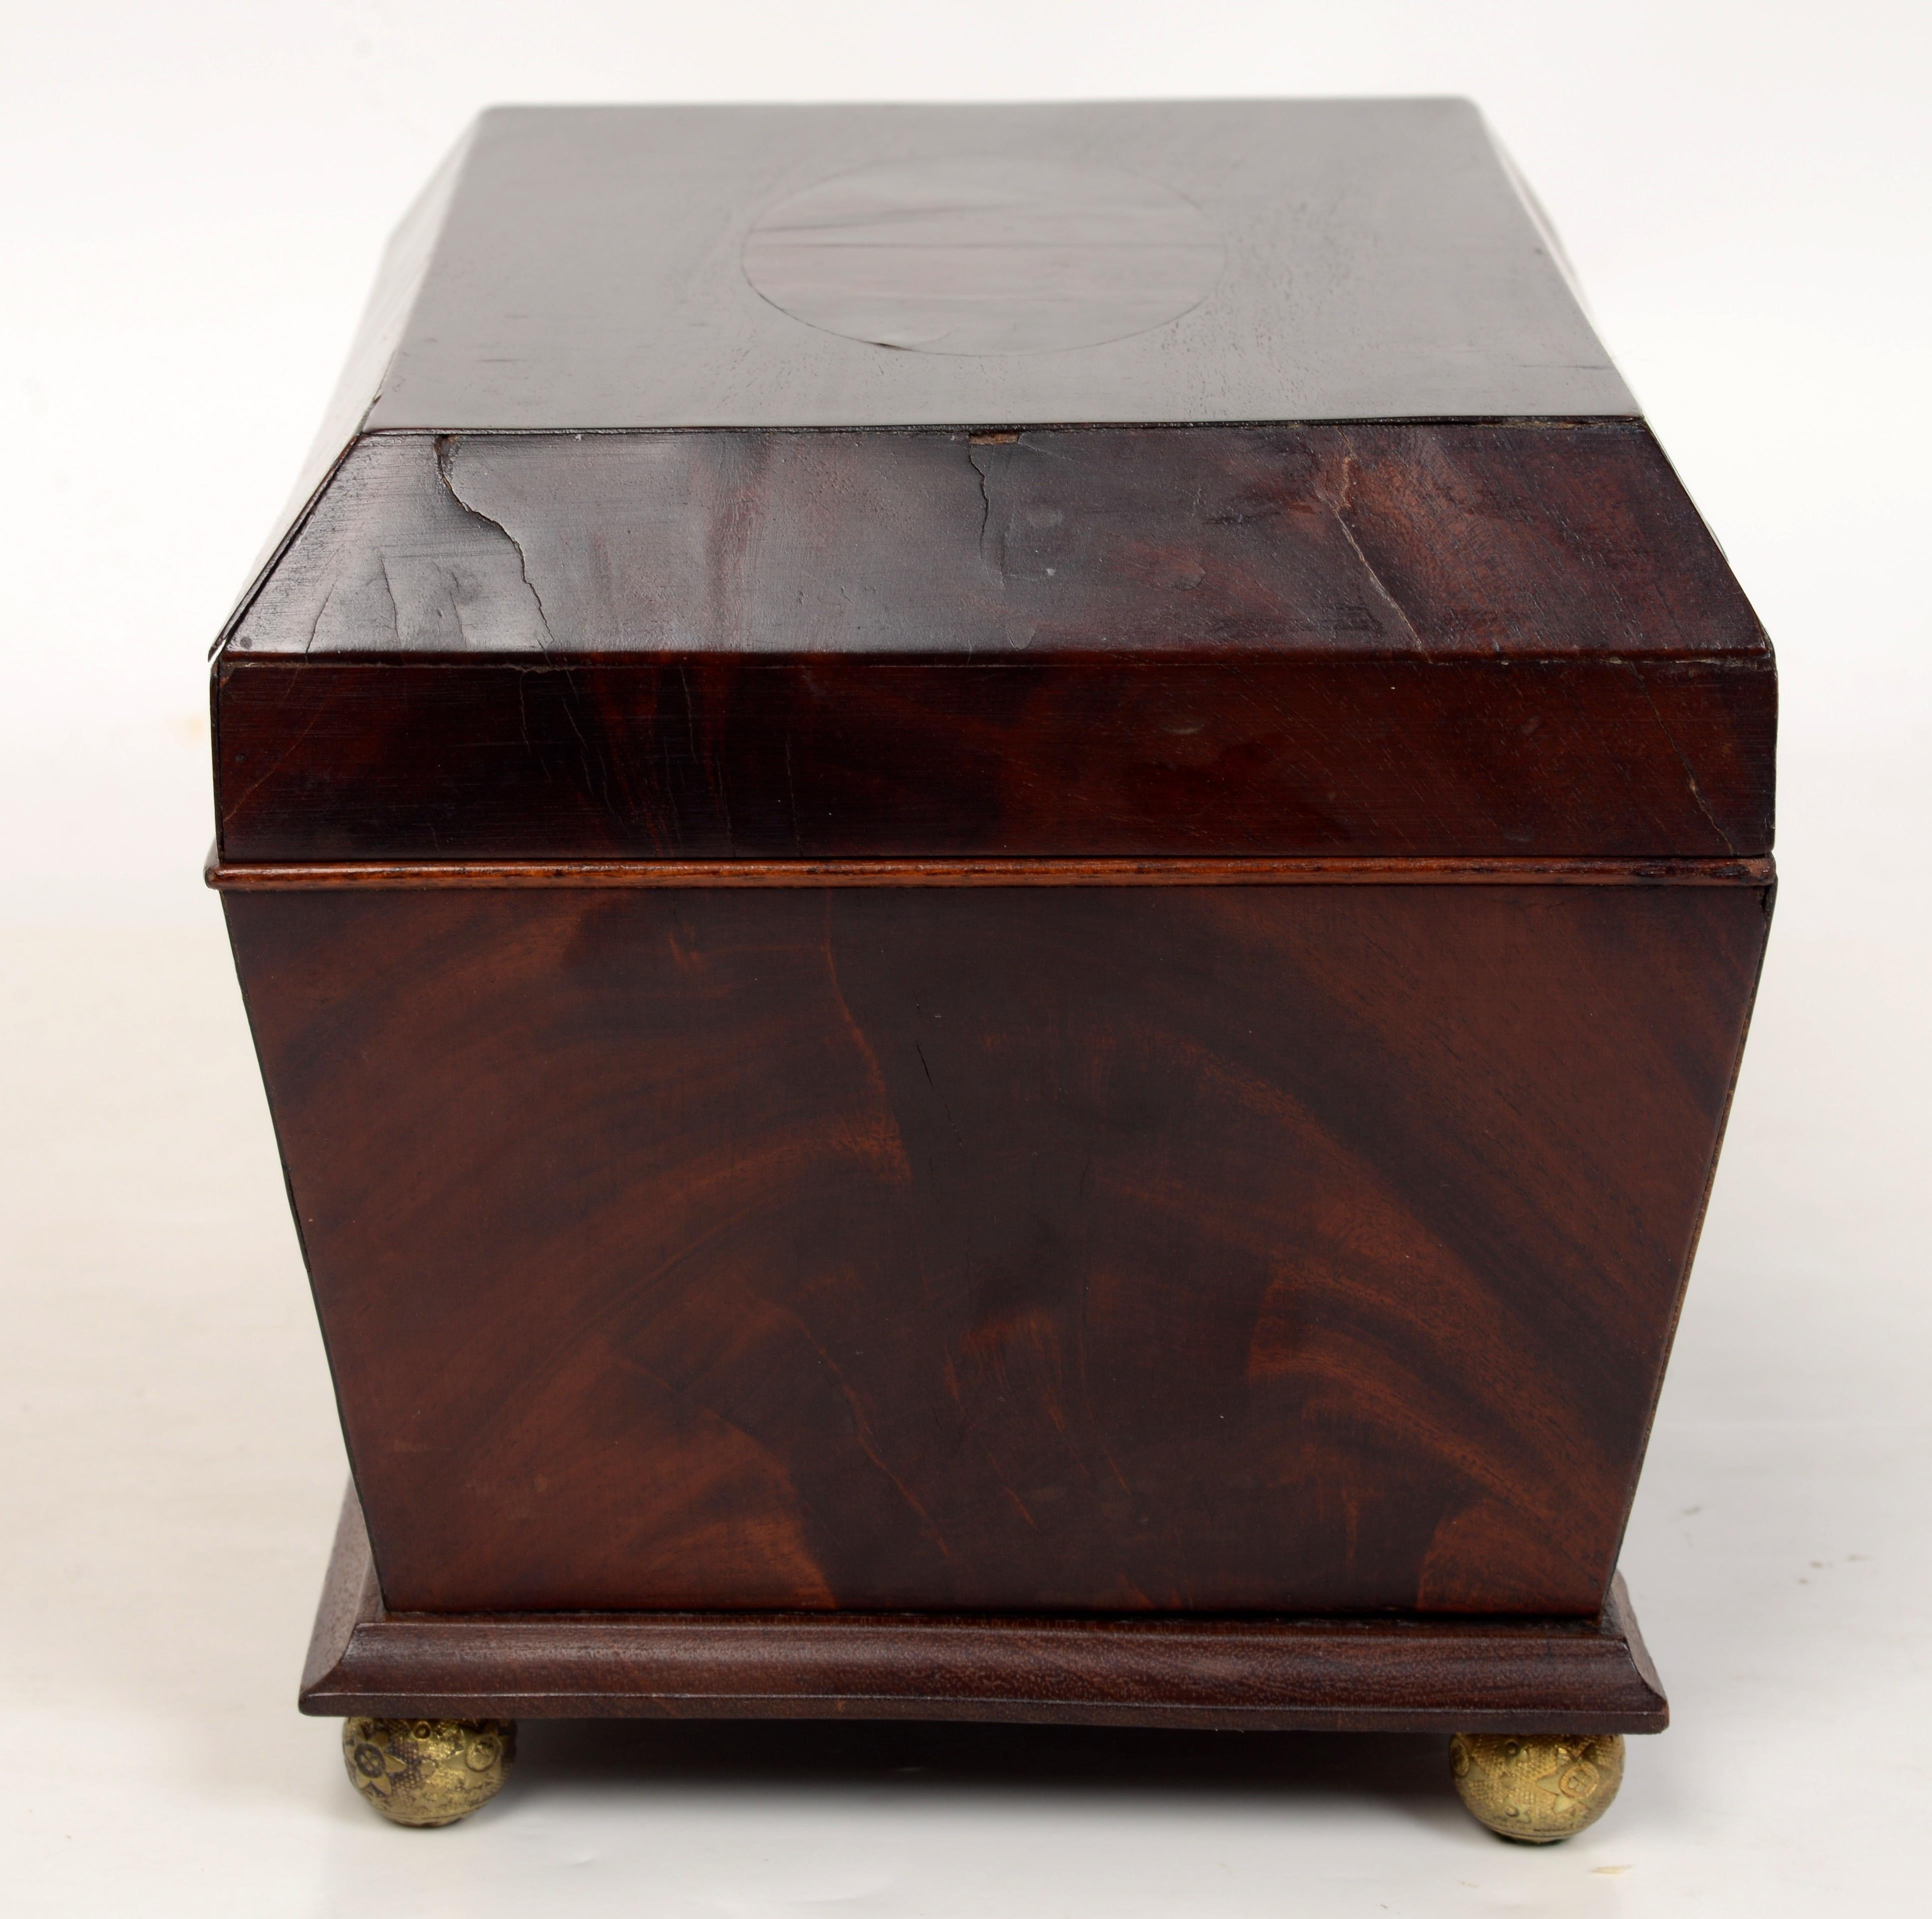 Inlay Regency Fan Inlaid Jewelry Box With Fitted Interior and Mirrored Lid, c1810 For Sale